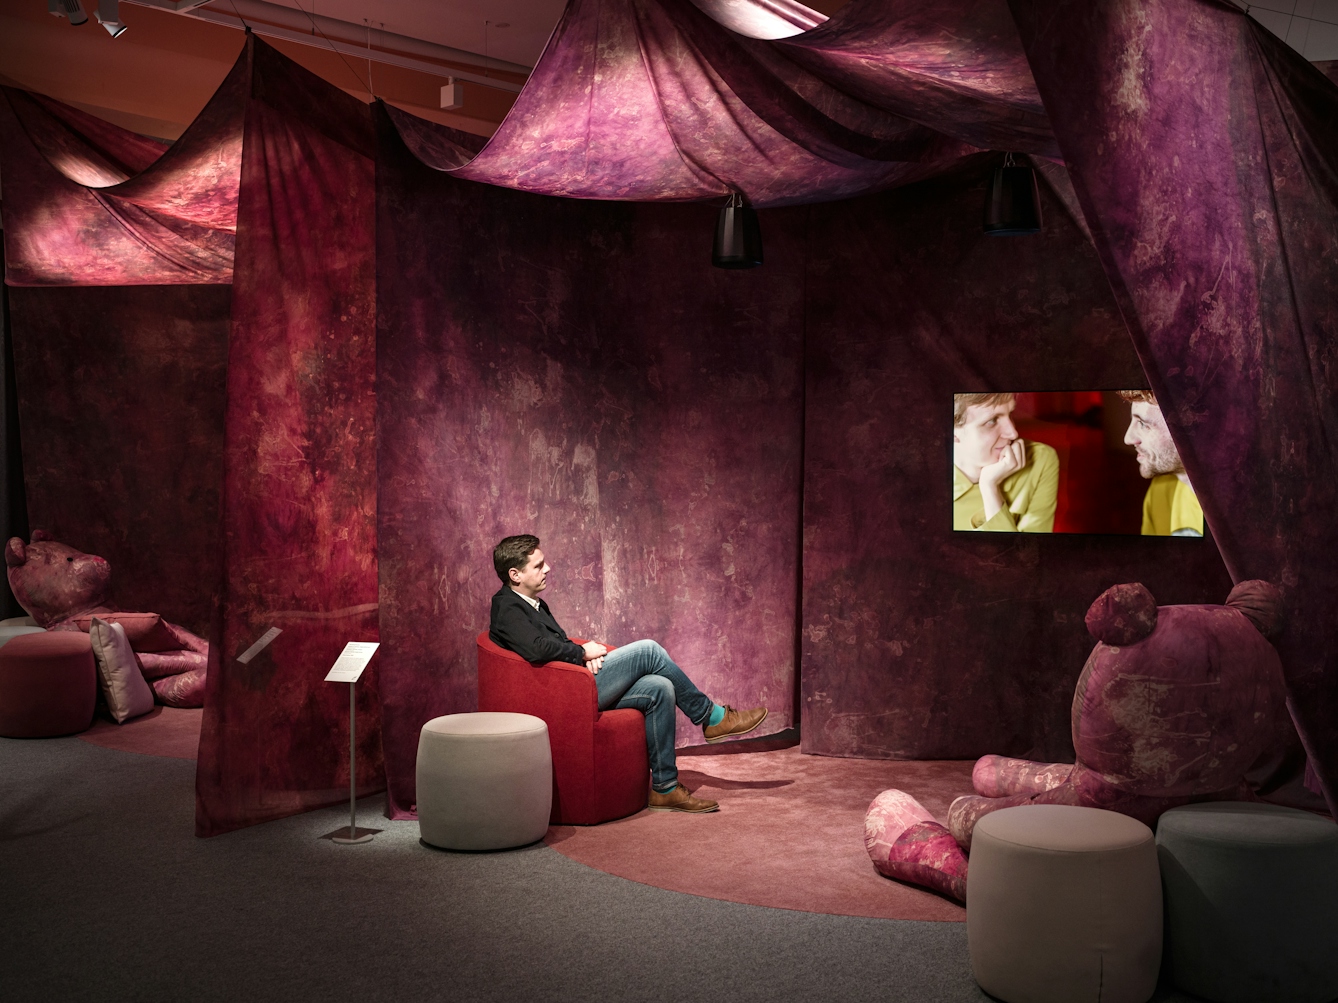 Photograph of a man sitting in a red chair under a purple and red tie-dye 'tent' installation suspended from the ceiling.  The man is looking at a flat panel TV that is hanging from the wall..  Inside the tent are several textile stools and two life size purple and red tie-dye bears.